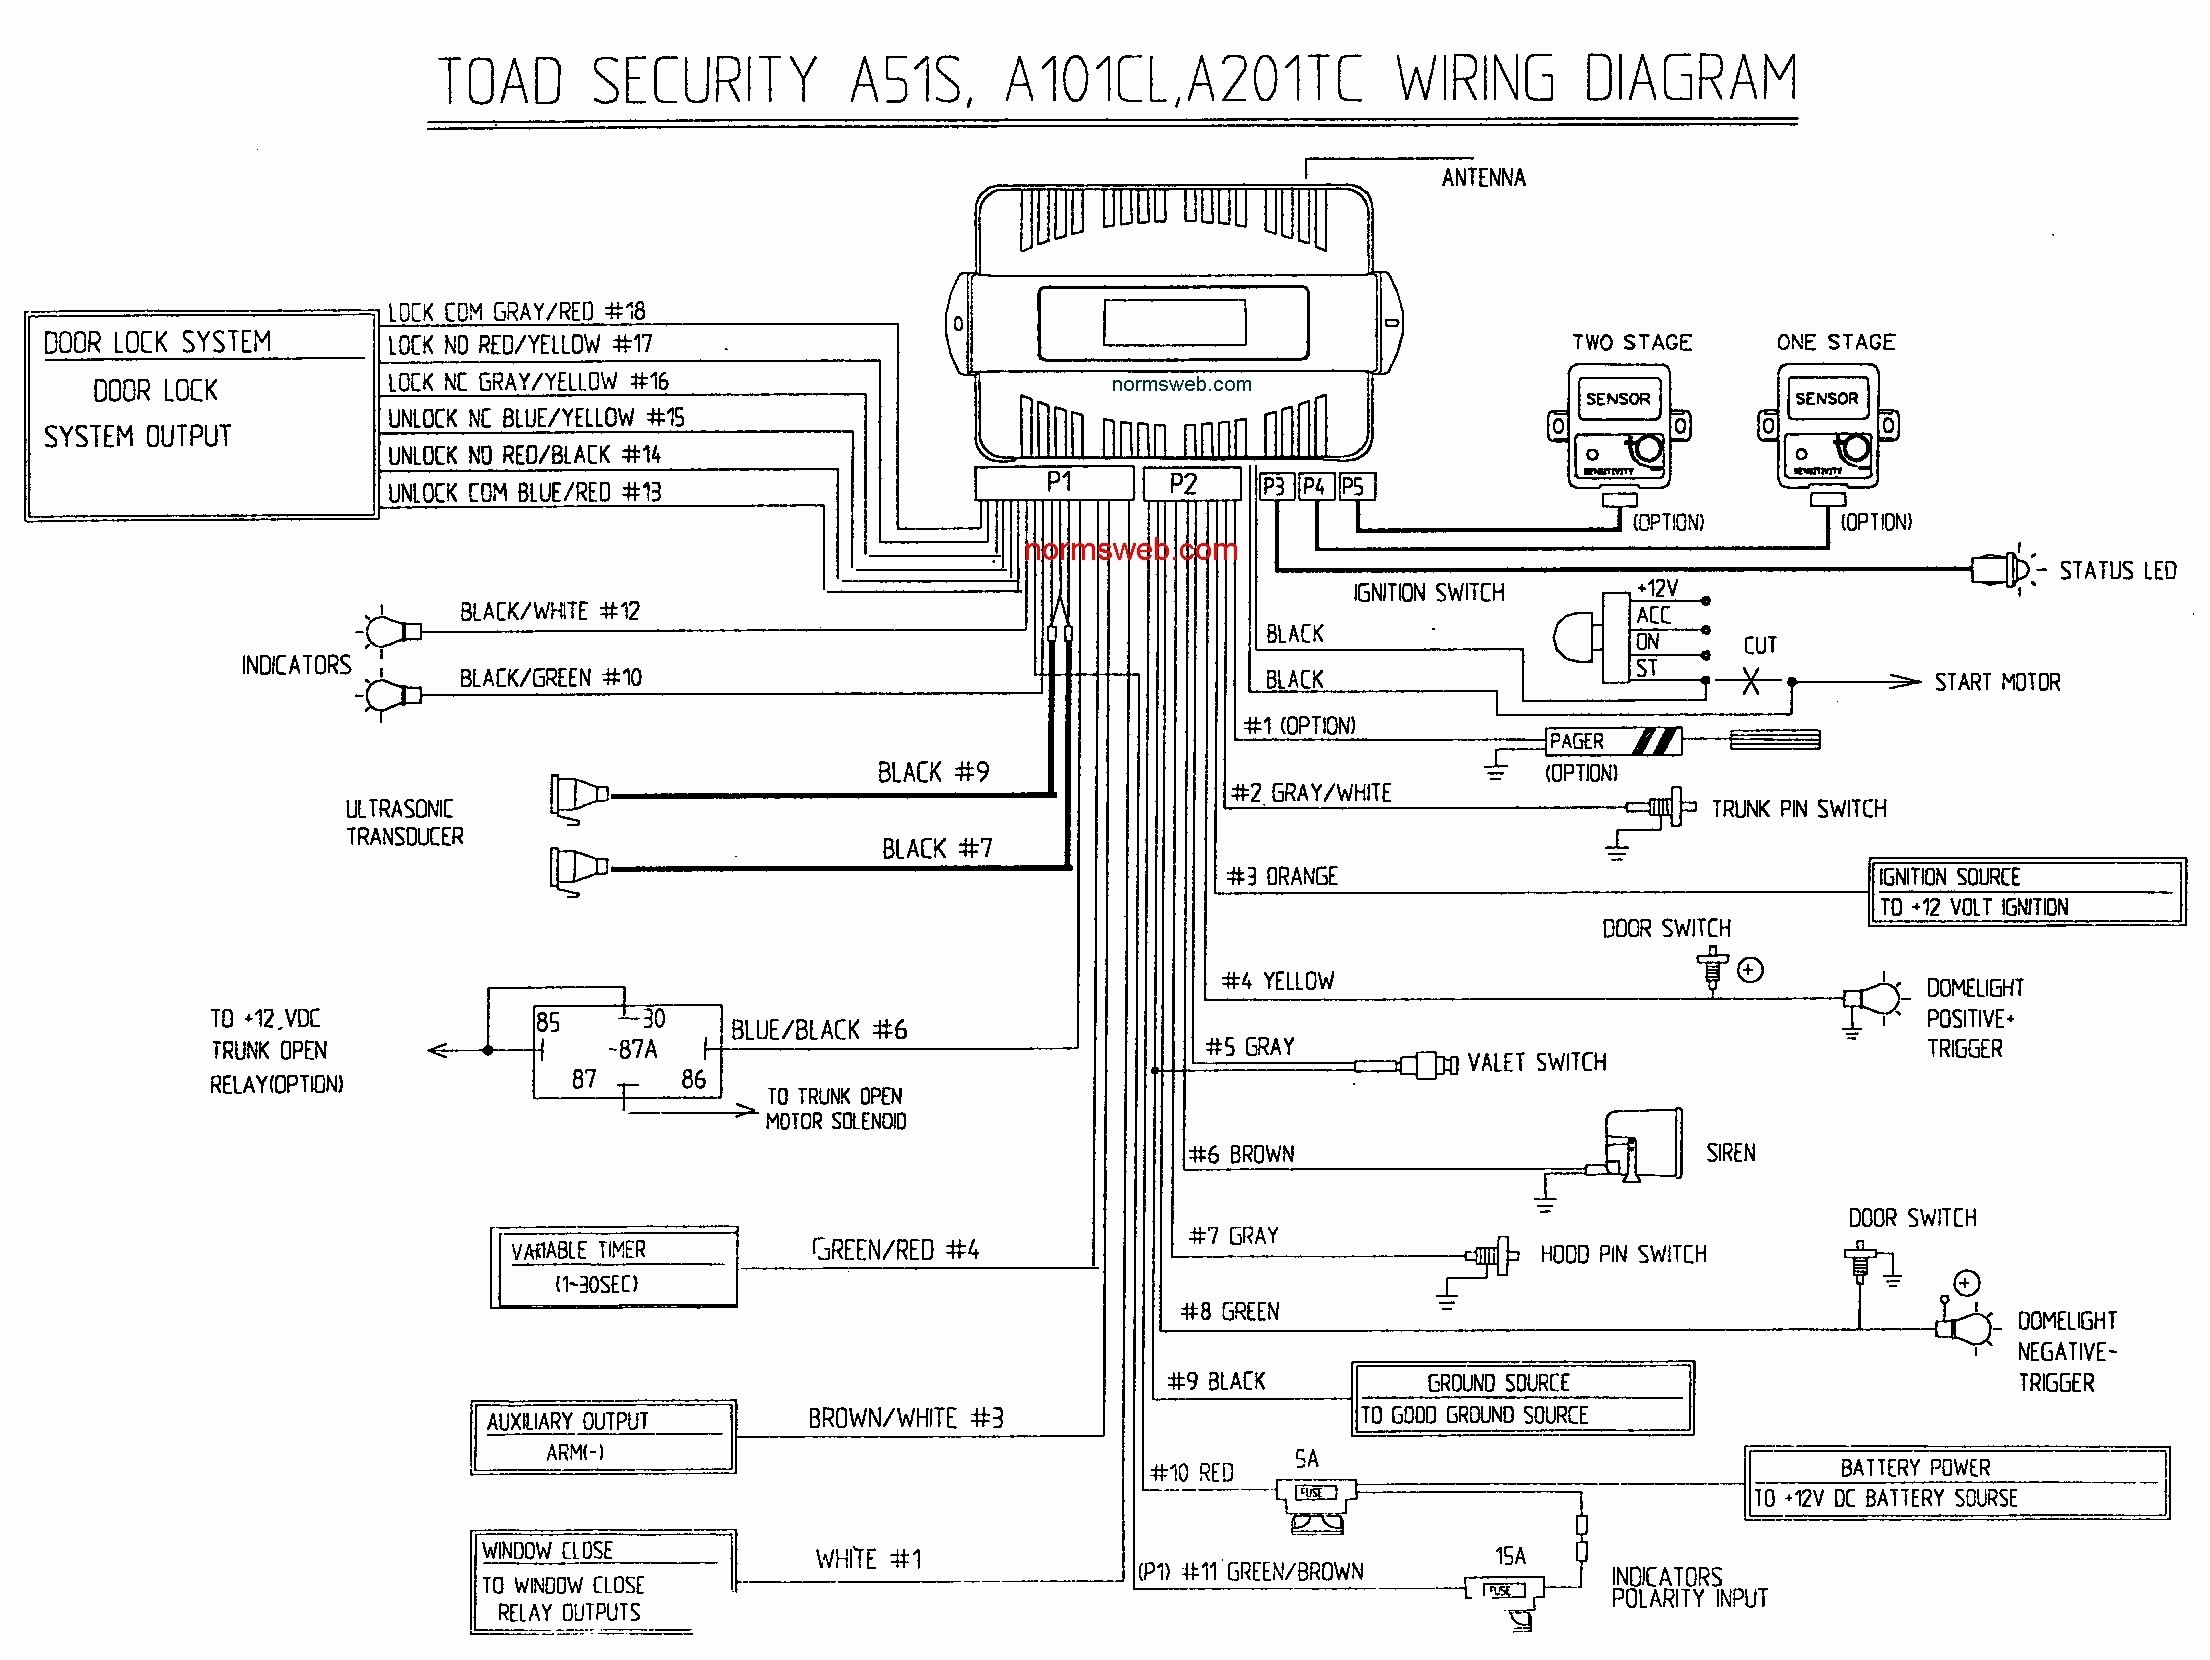 Wiring Diagram for Code Alarm Valid Wiring Diagram Car Alarm Wiring Diagram Unique Bulldog Security